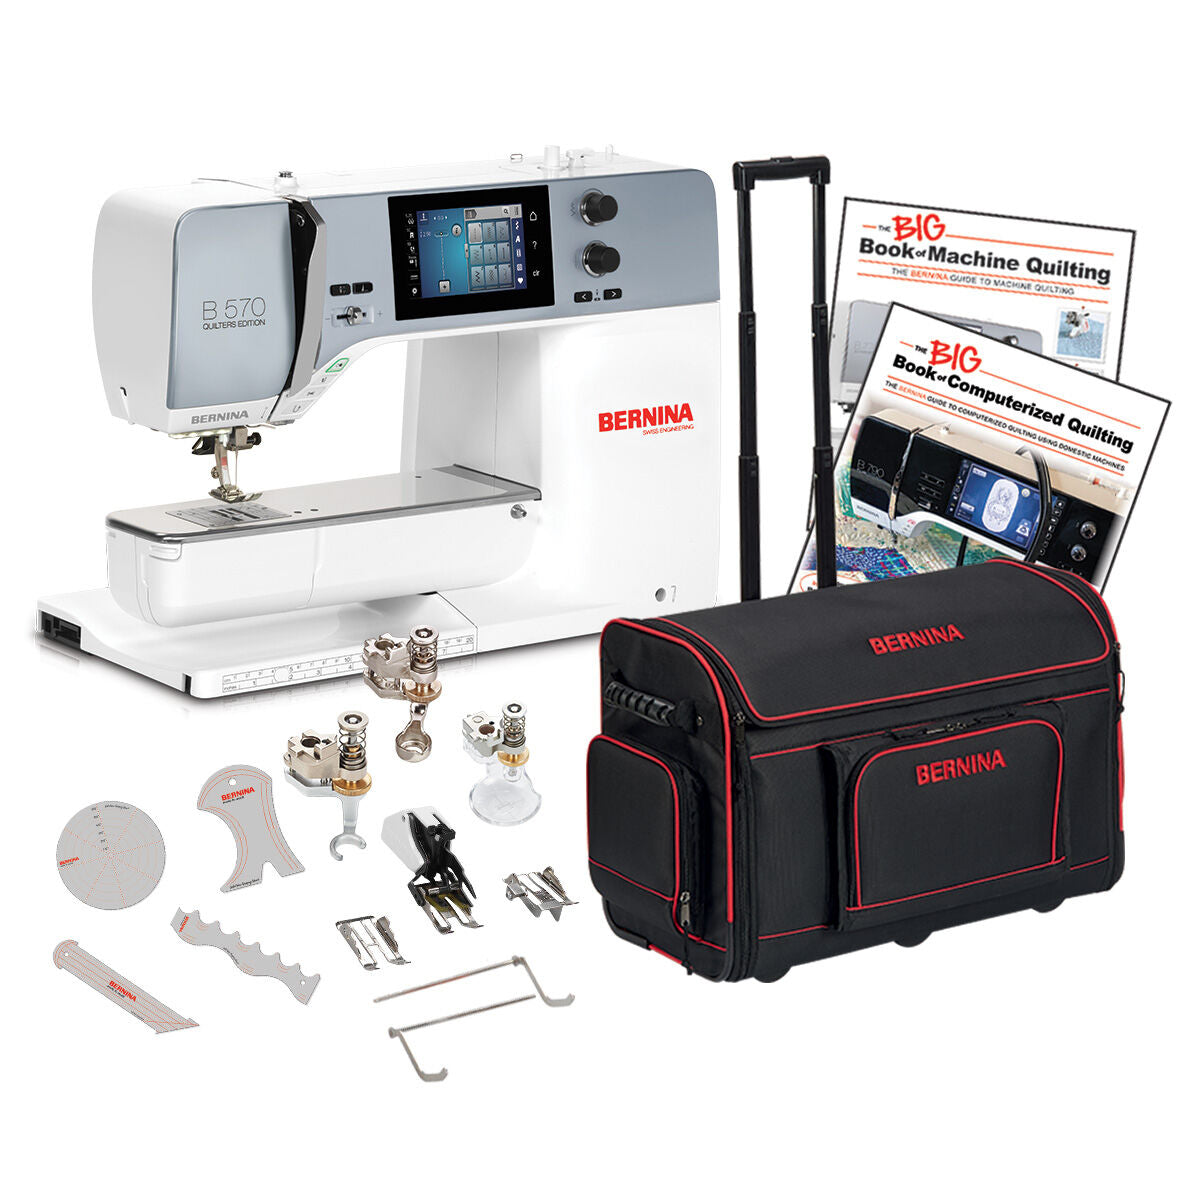 Bernina B570QE Sewing and Quilting Machine with Table,Bernina B570QE Sewing and Quilting Machine with Table,Bernina B570QE Sewing and Quilting Machine,Bernina B570QE Sewing and Quilting Machine,Bernina B570QE Sewing and Quilting Machine,Bernina B570QE Sewing and Quilting Machine